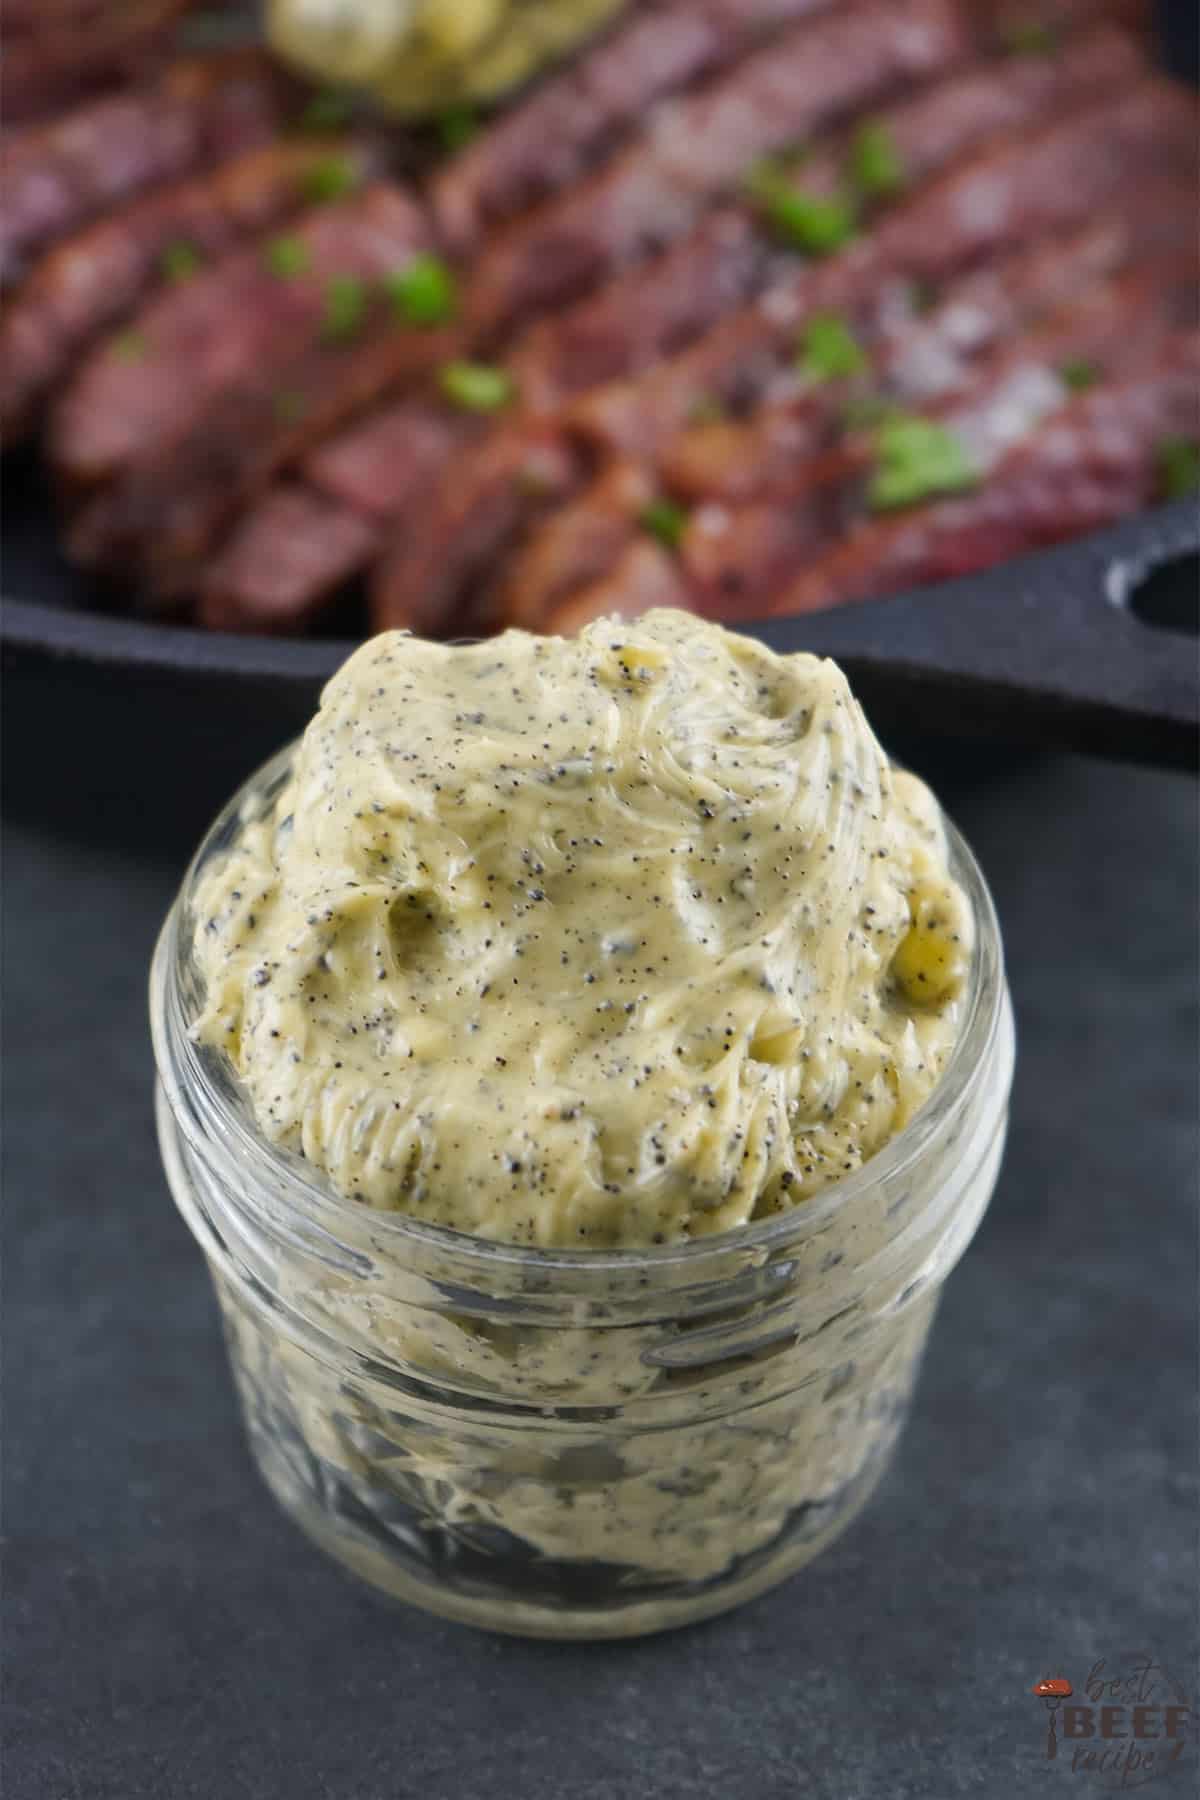 Truffle butter in a glass container by sliced wagyu steak